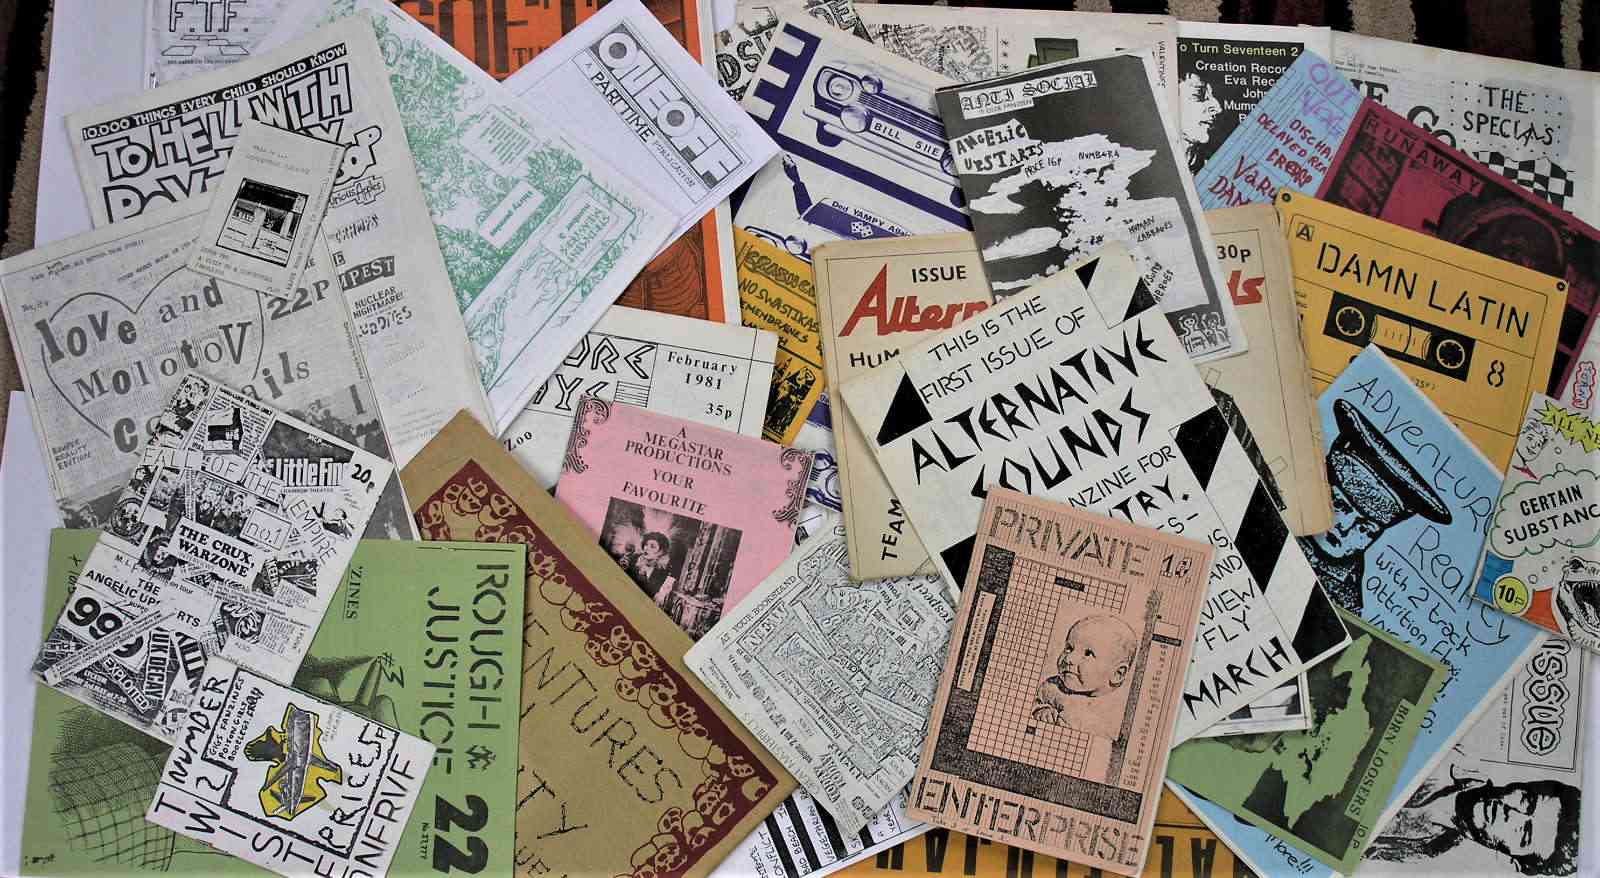 Tales From The Ghost Town Alan Rider talks about his finely crafted book on Coventry's 70s/80s fanzine culture